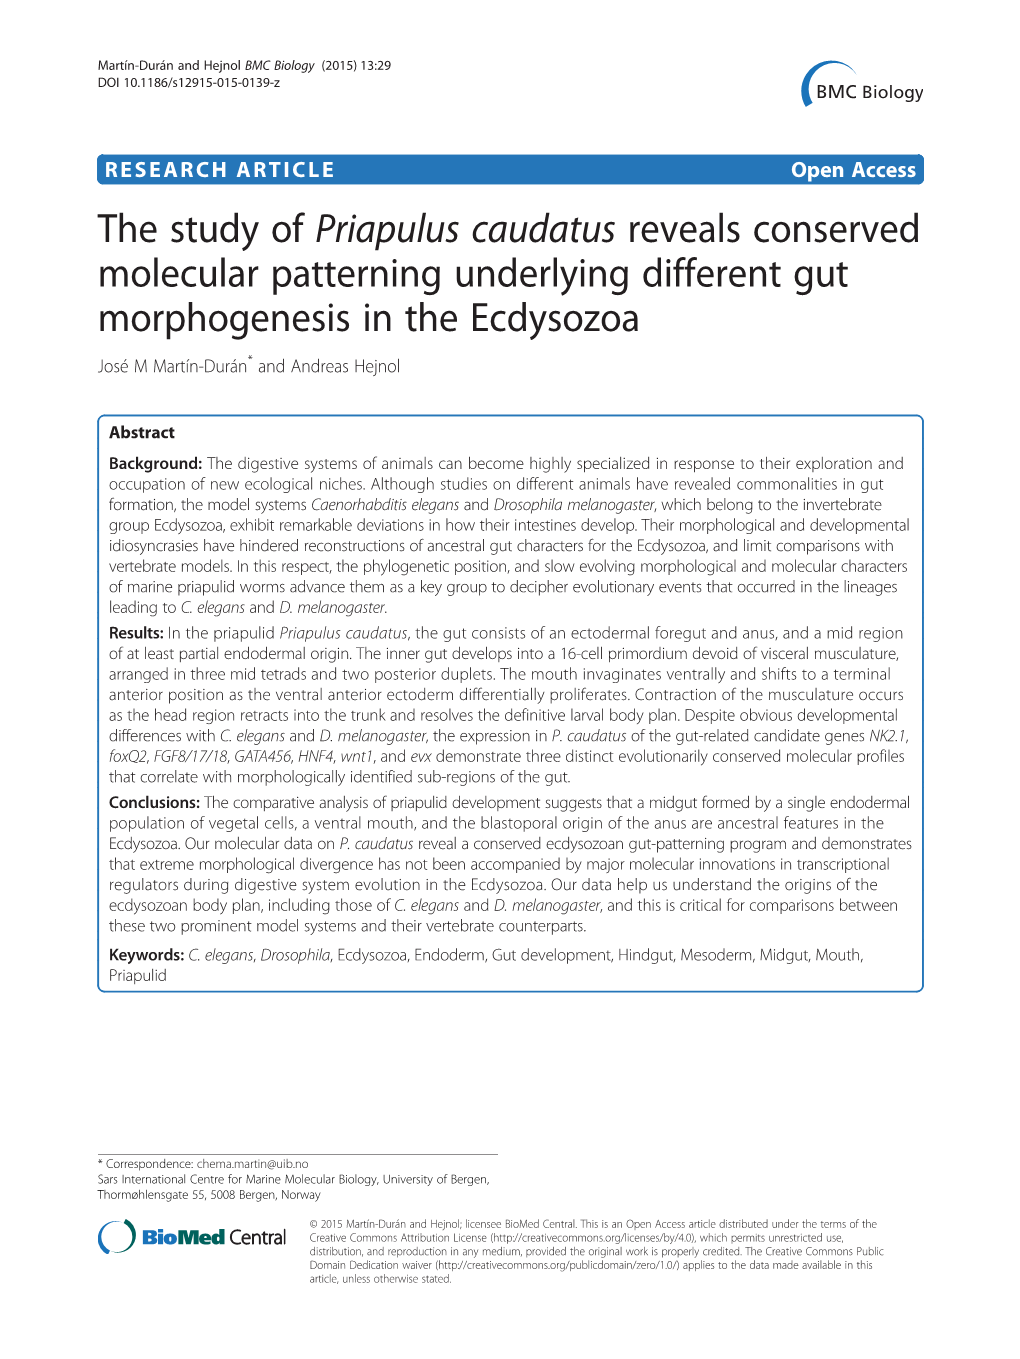 The Study of Priapulus Caudatus Reveals Conserved Molecular Patterning Underlying Different Gut Morphogenesis in the Ecdysozoa José M Martín-Durán* and Andreas Hejnol